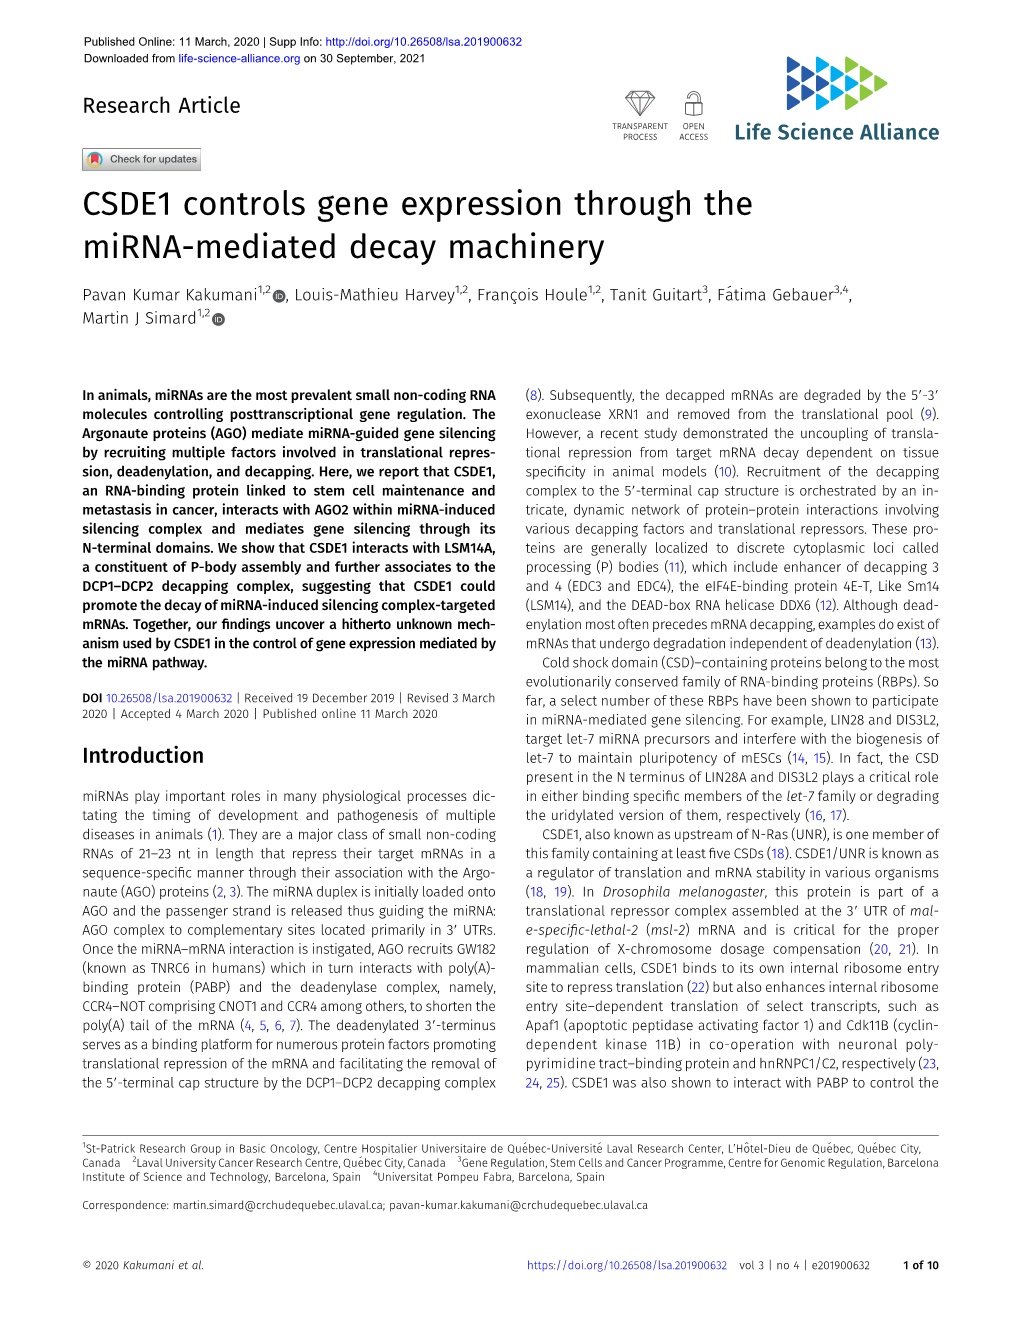 CSDE1 Controls Gene Expression Through the Mirna-Mediated Decay Machinery